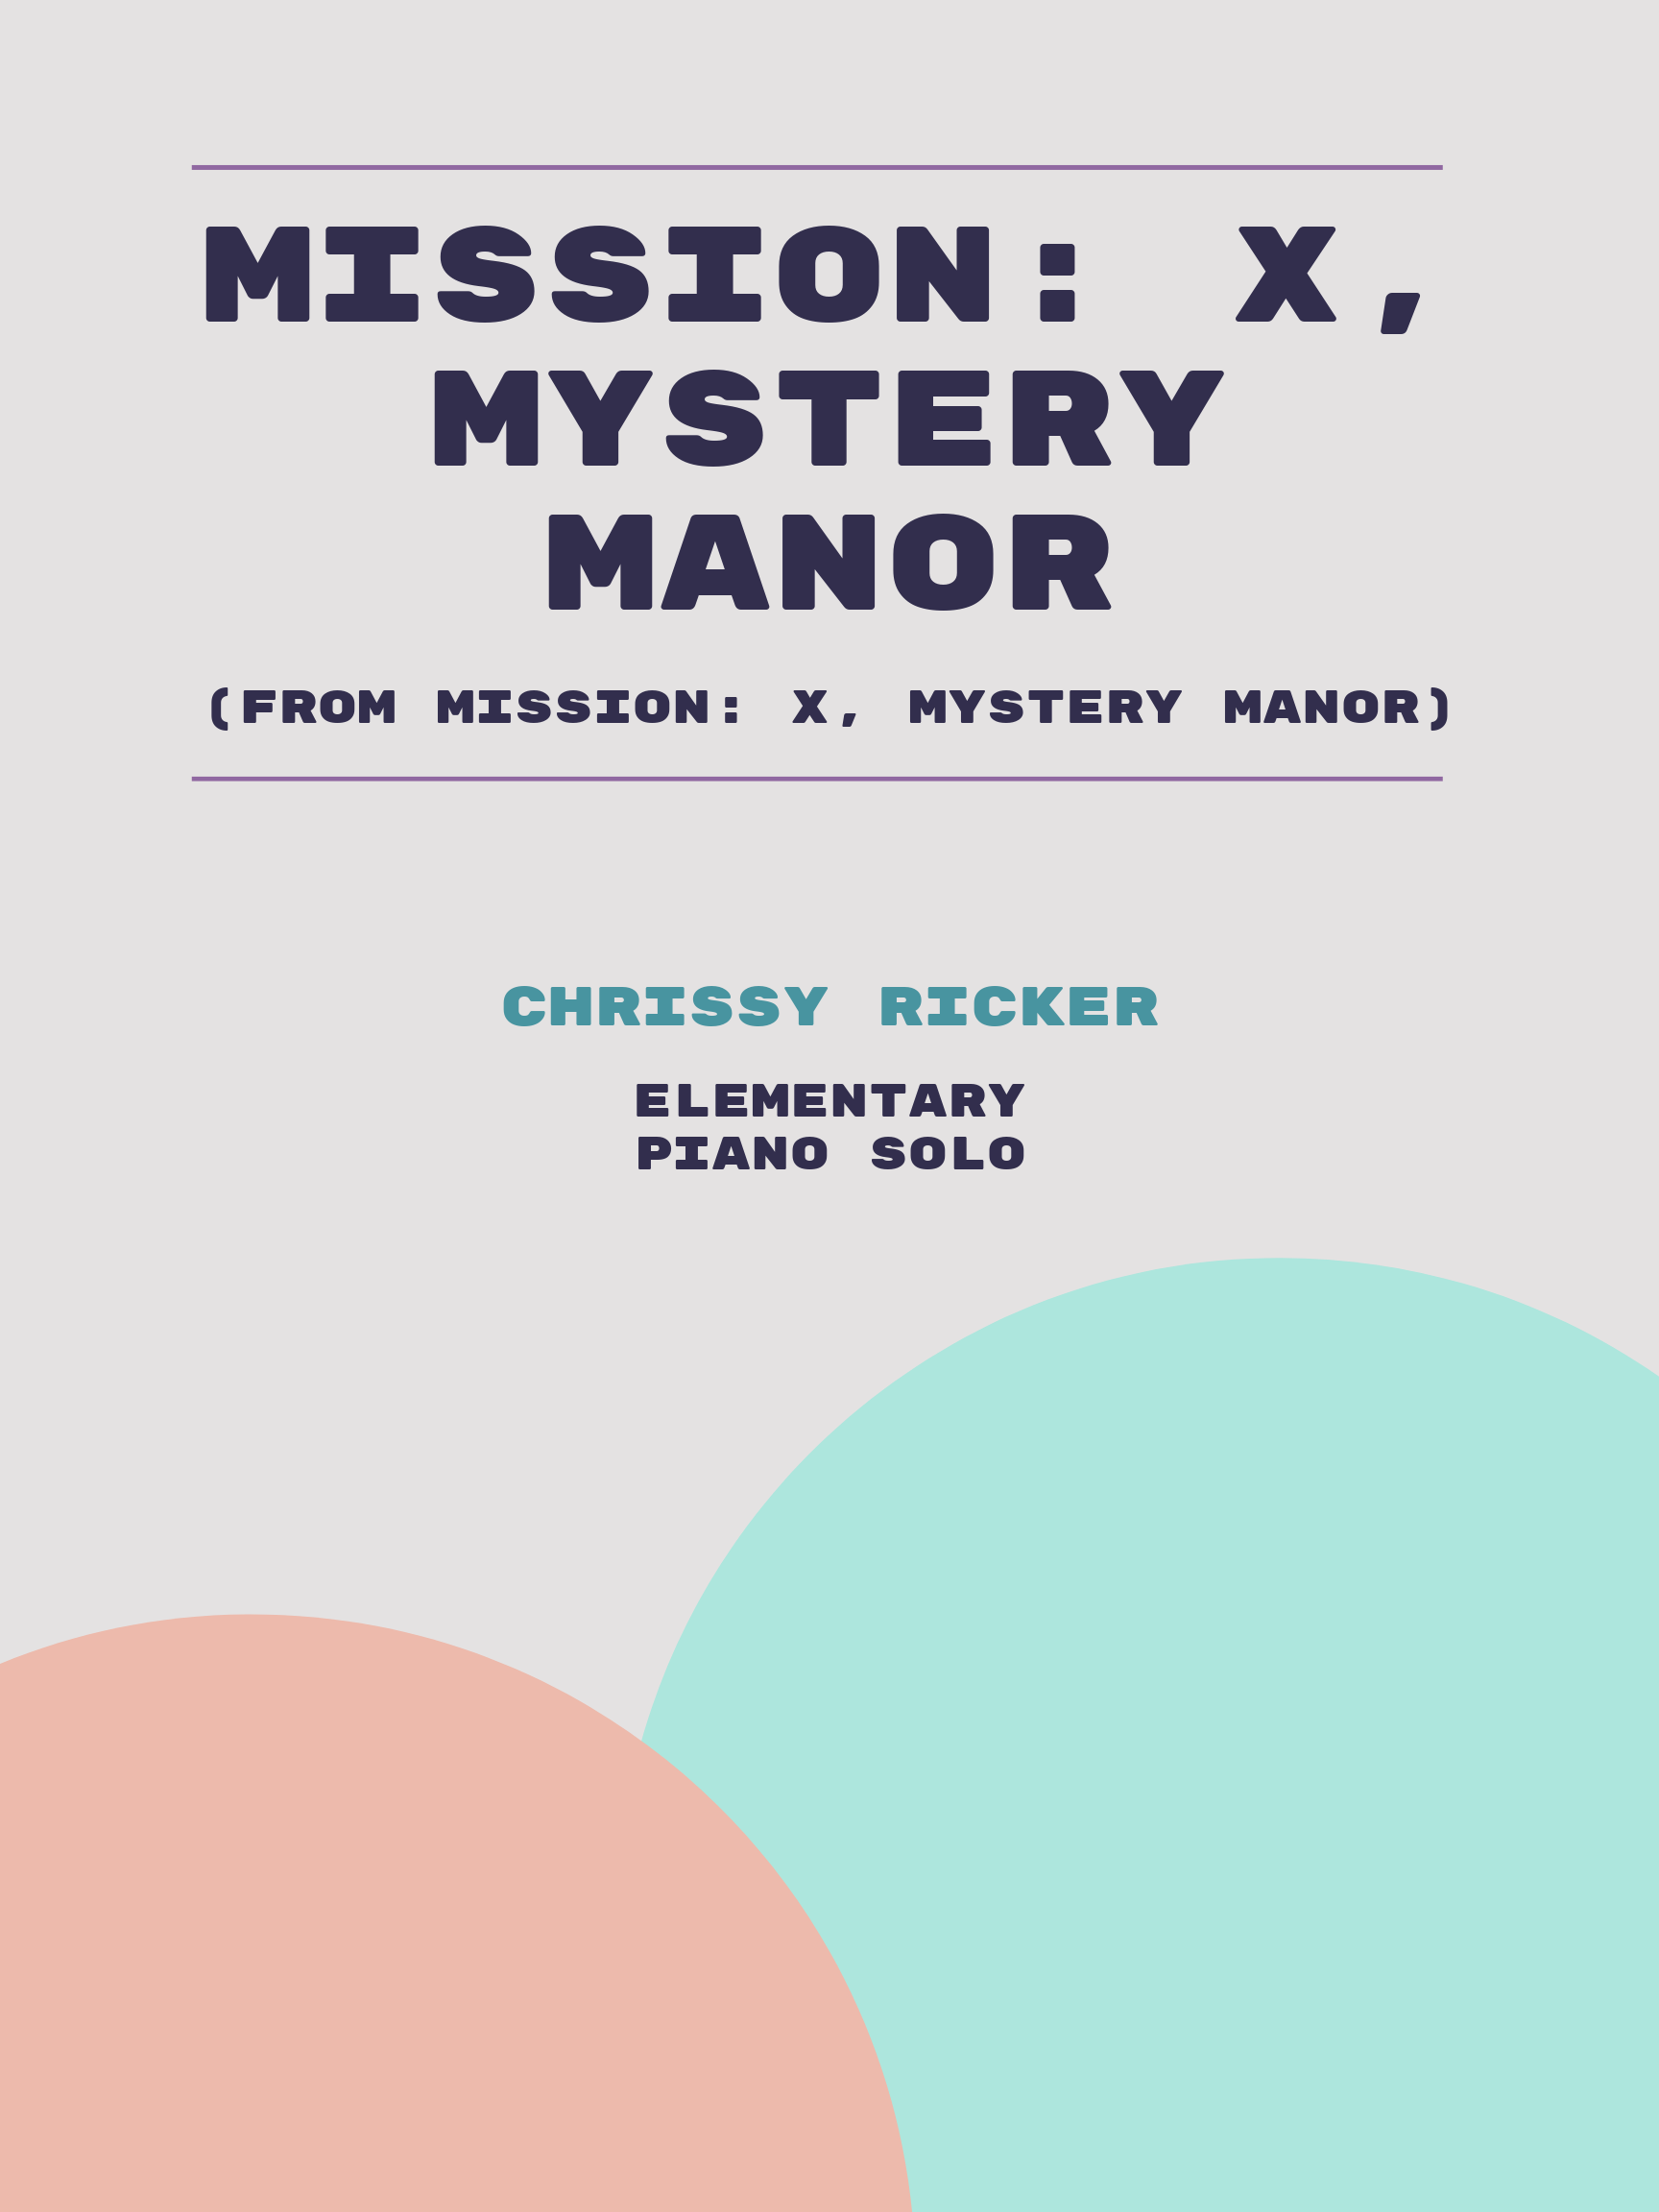 Mission: X, Mystery Manor by Chrissy Ricker